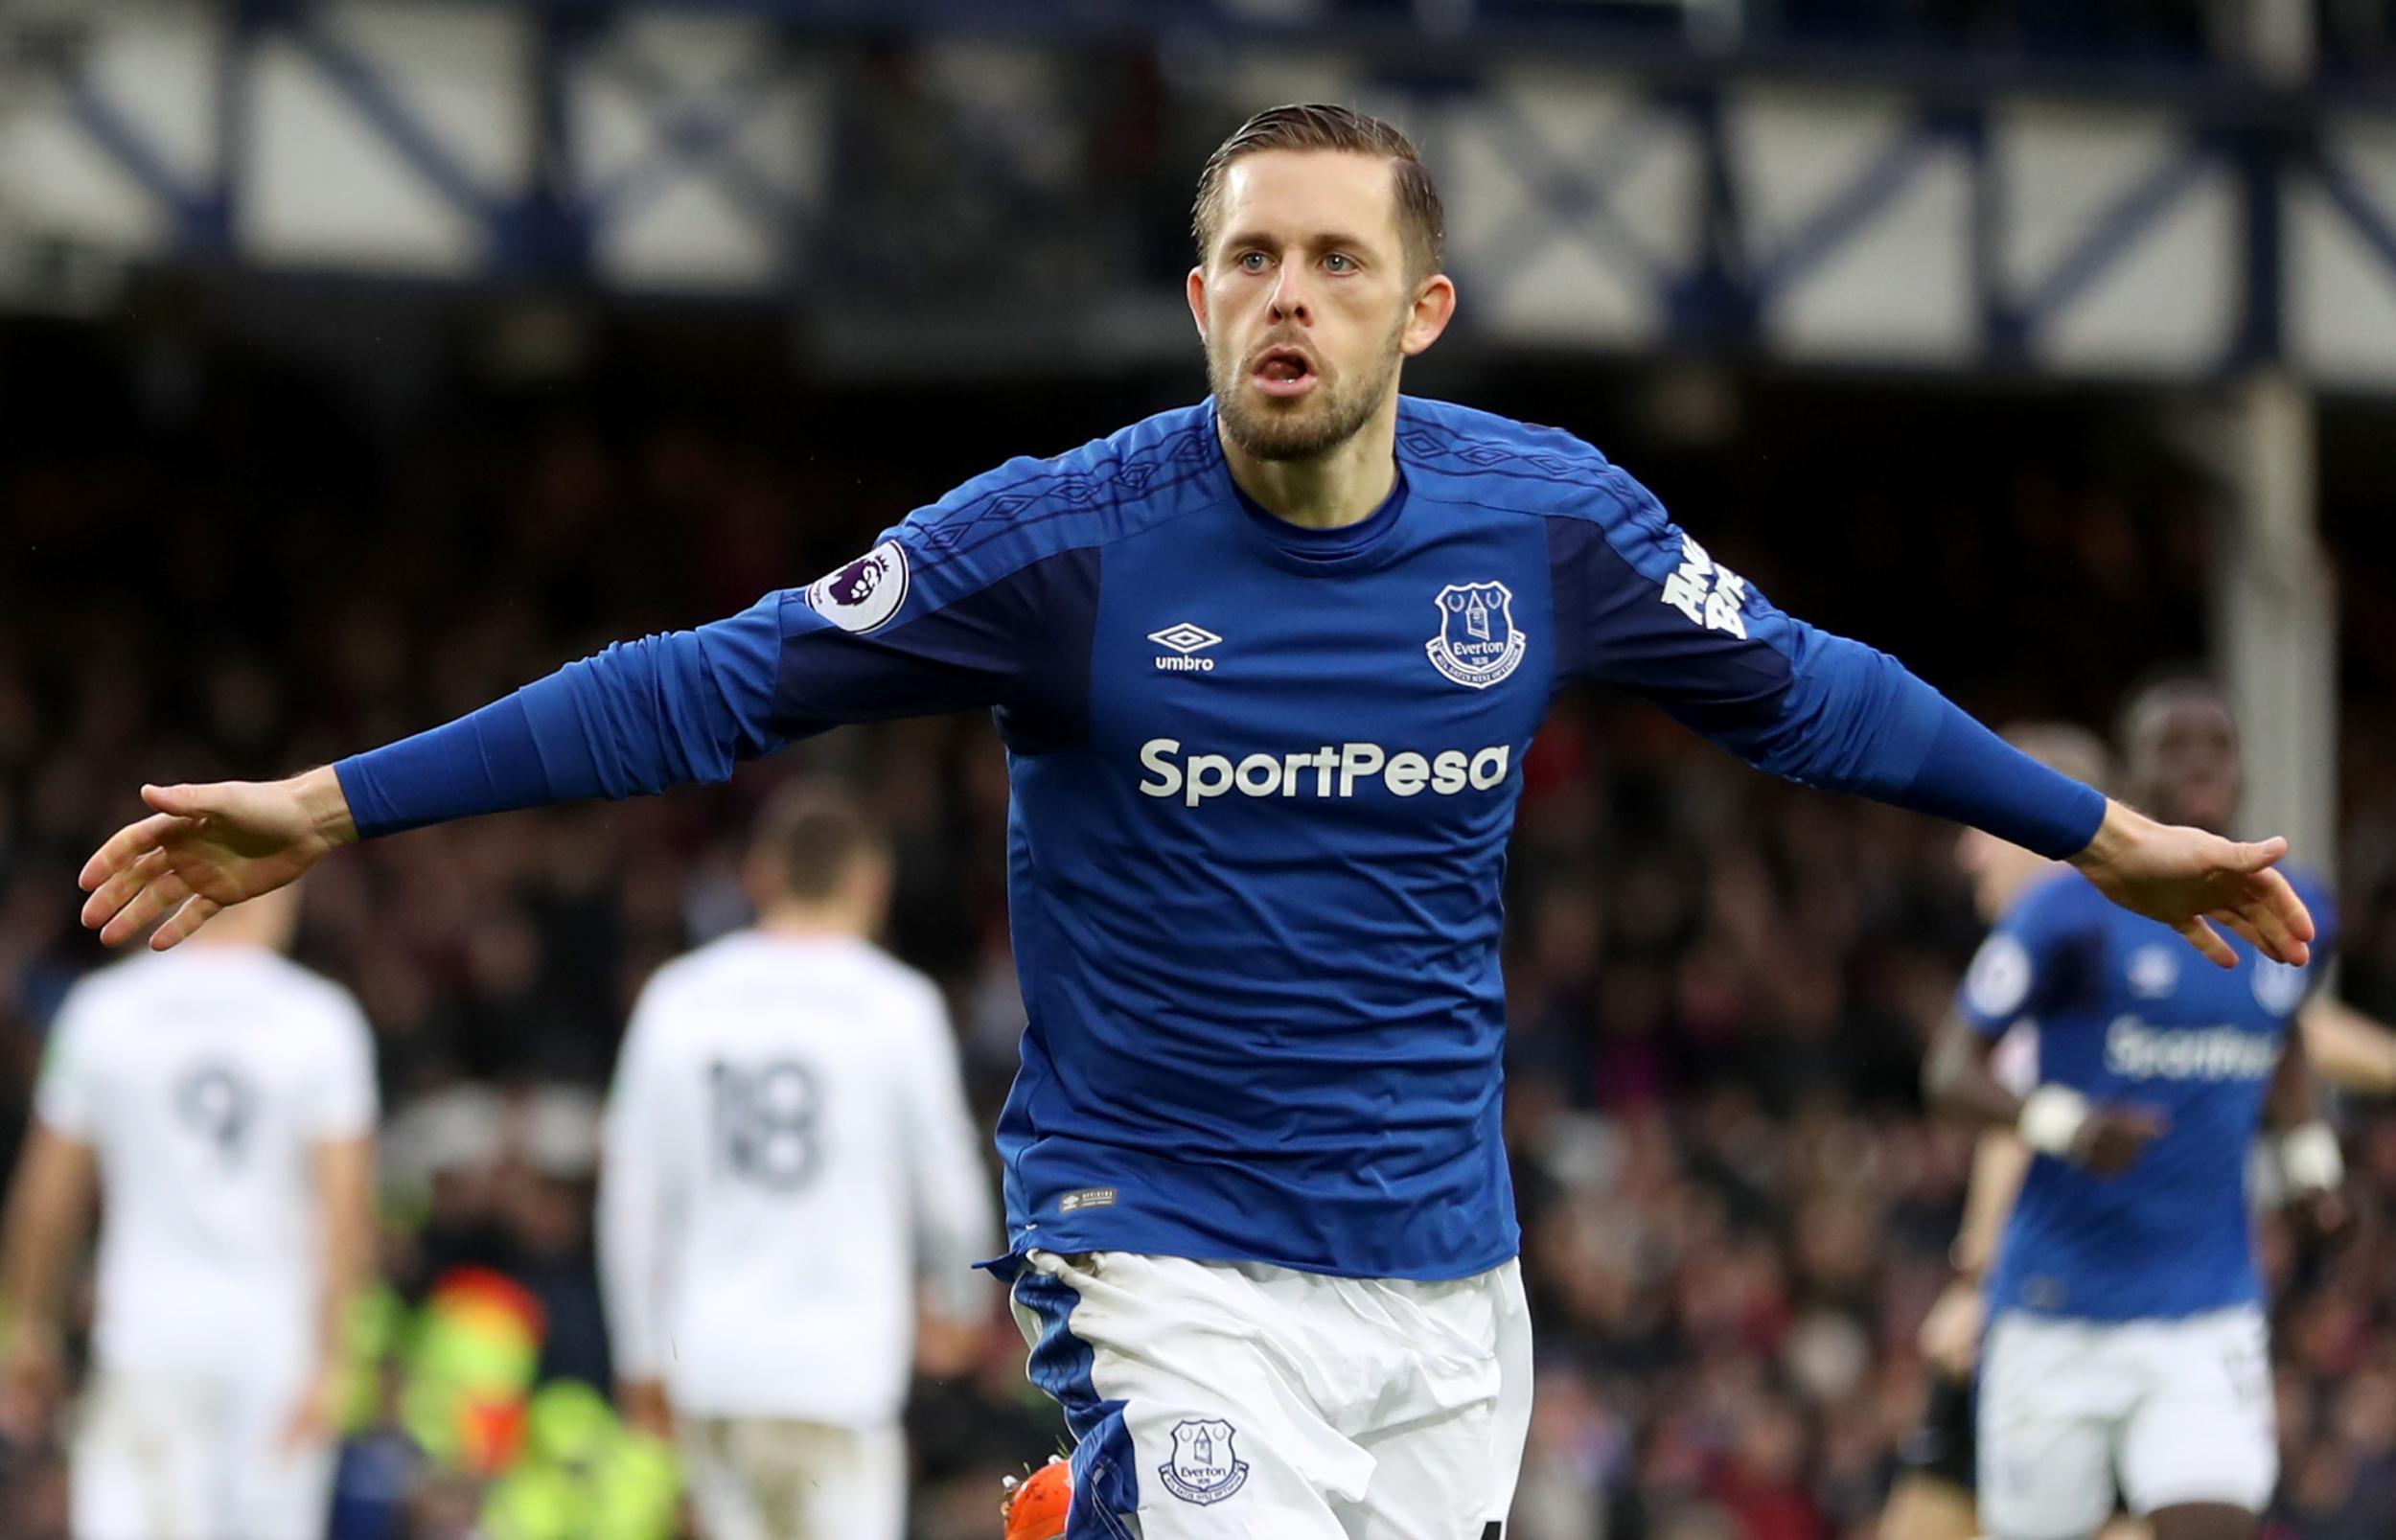 Sam Allardyce says someone at Everton is in for &apos;a b*********&apos; over statement Gylfi Sigurdsson will miss eight weeks